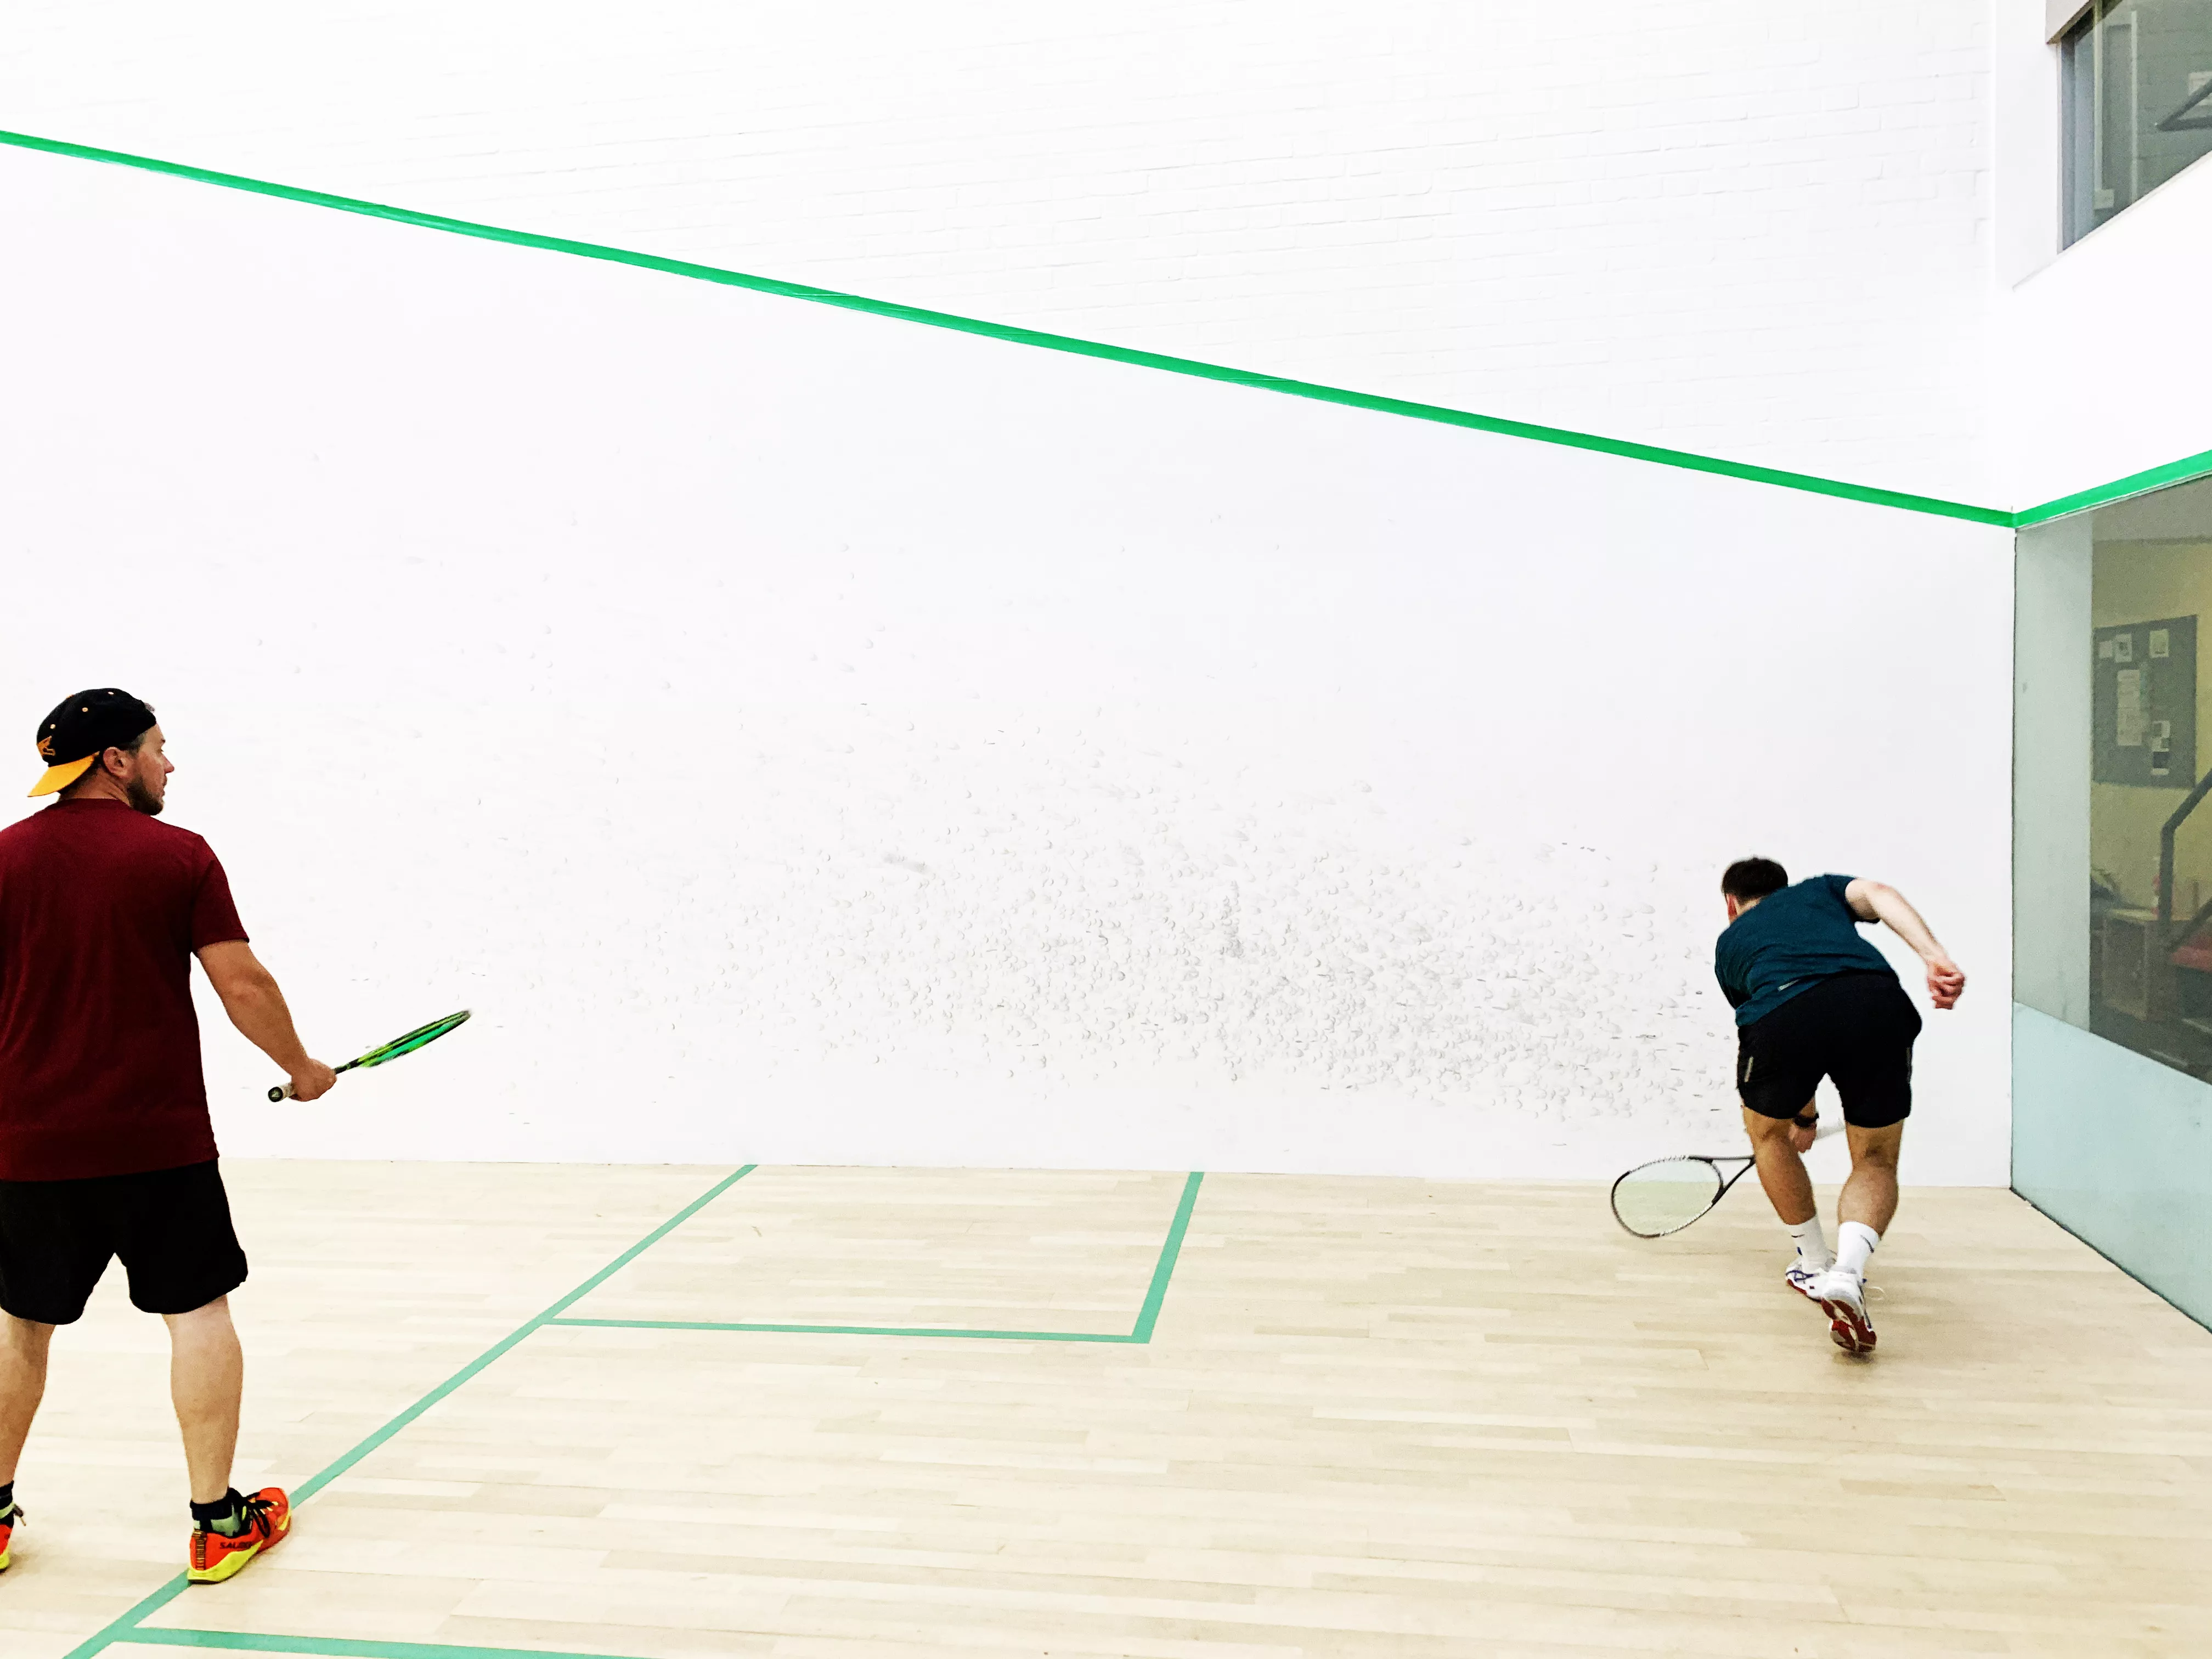 Total Sport Fitness & Squash in Bulgaria, Europe | Squash - Rated 1.9